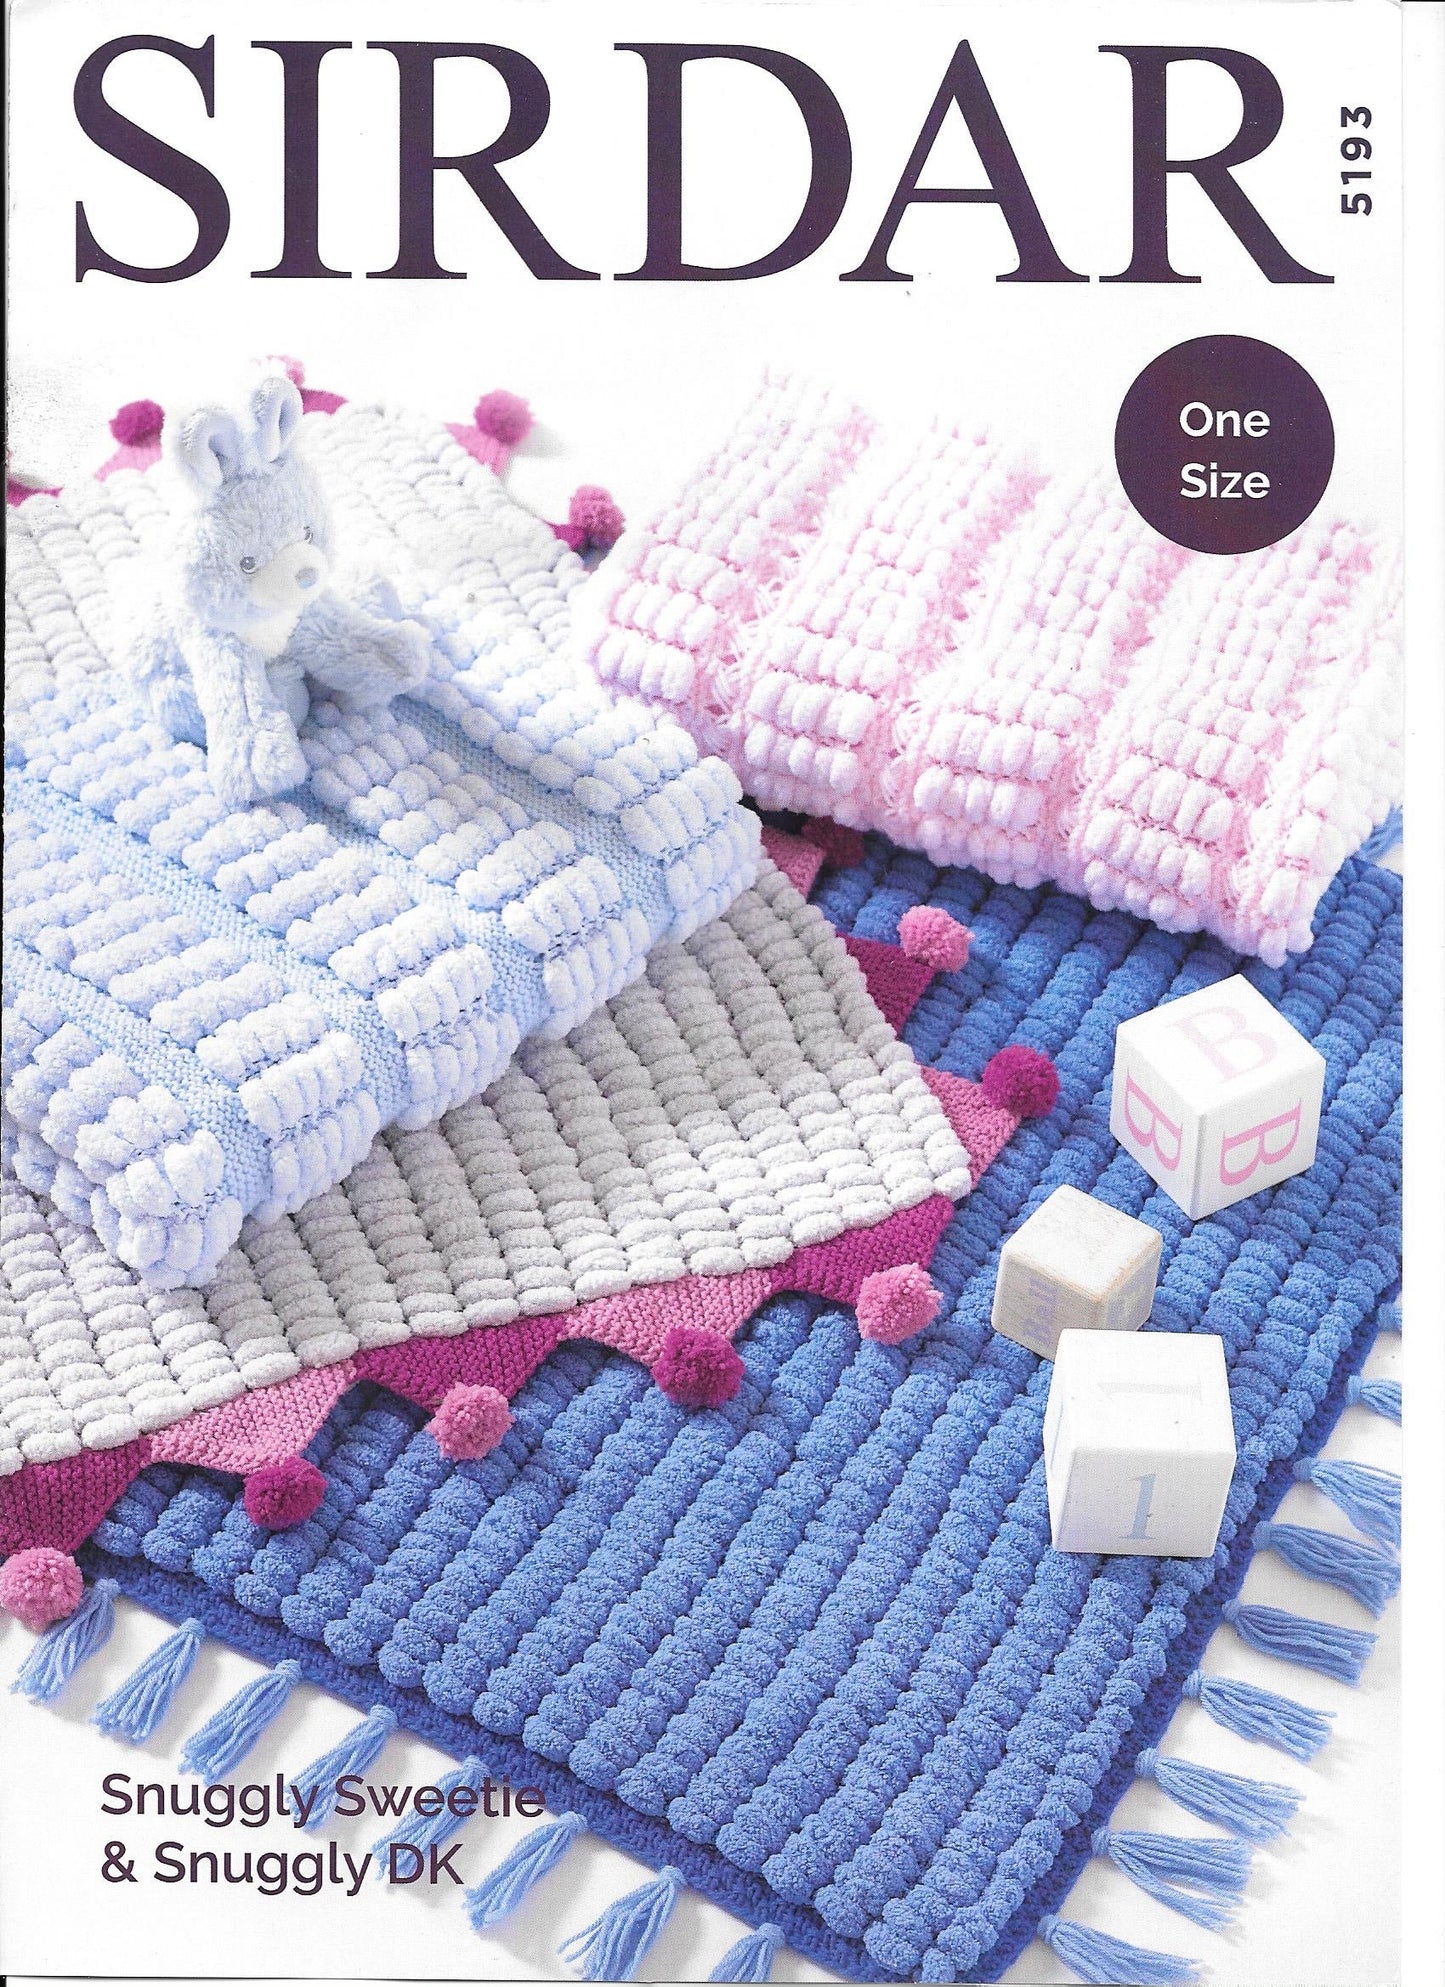 5193 Sirdar Snuggly Sweetie & Snuggly dk baby blankets knitting pattern